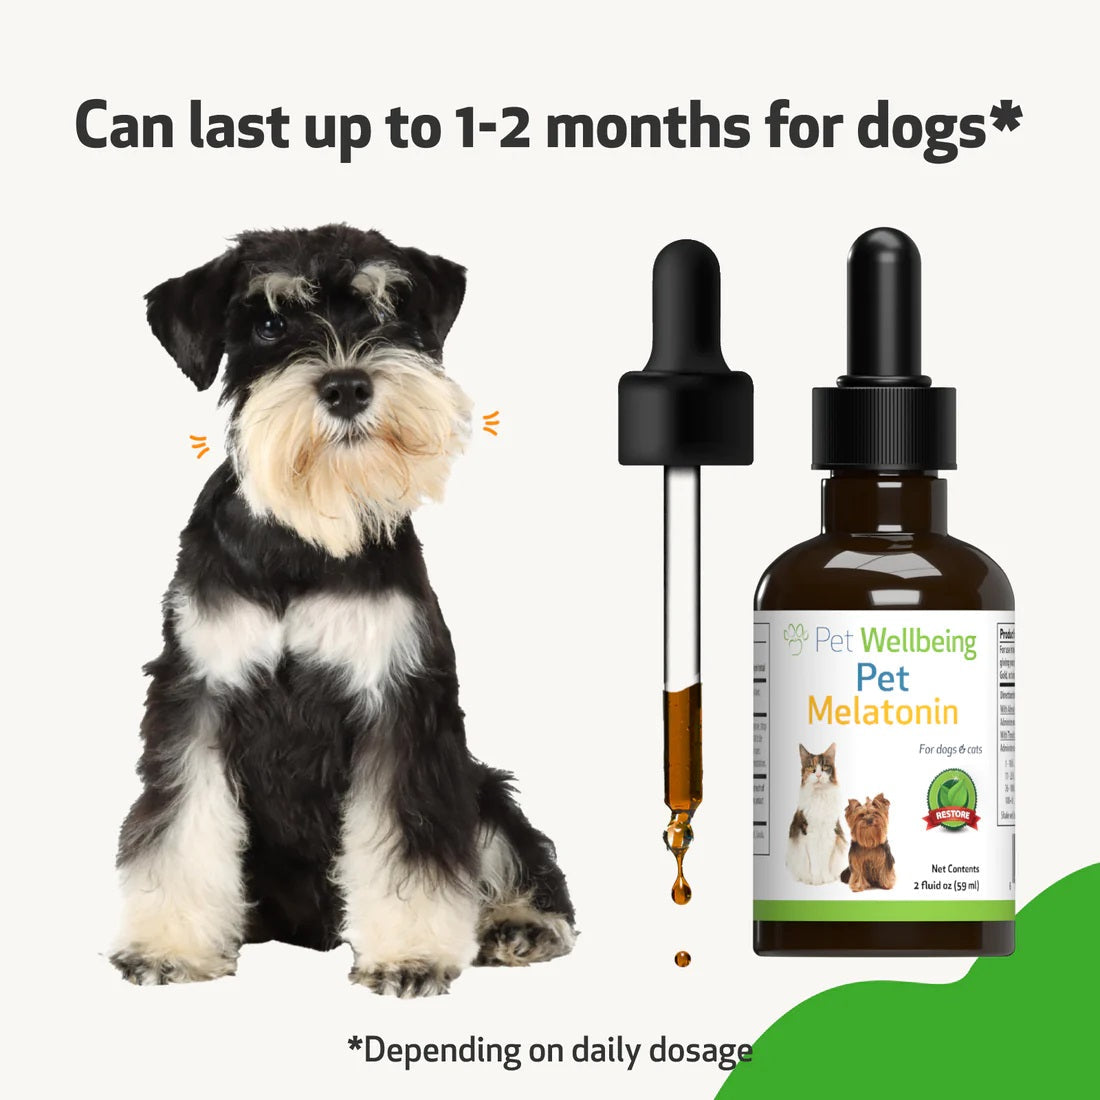 Pet Wellbeing - Pet Melatonin for Cats & Dogs - Support for dog Cushing's disease or anxiety